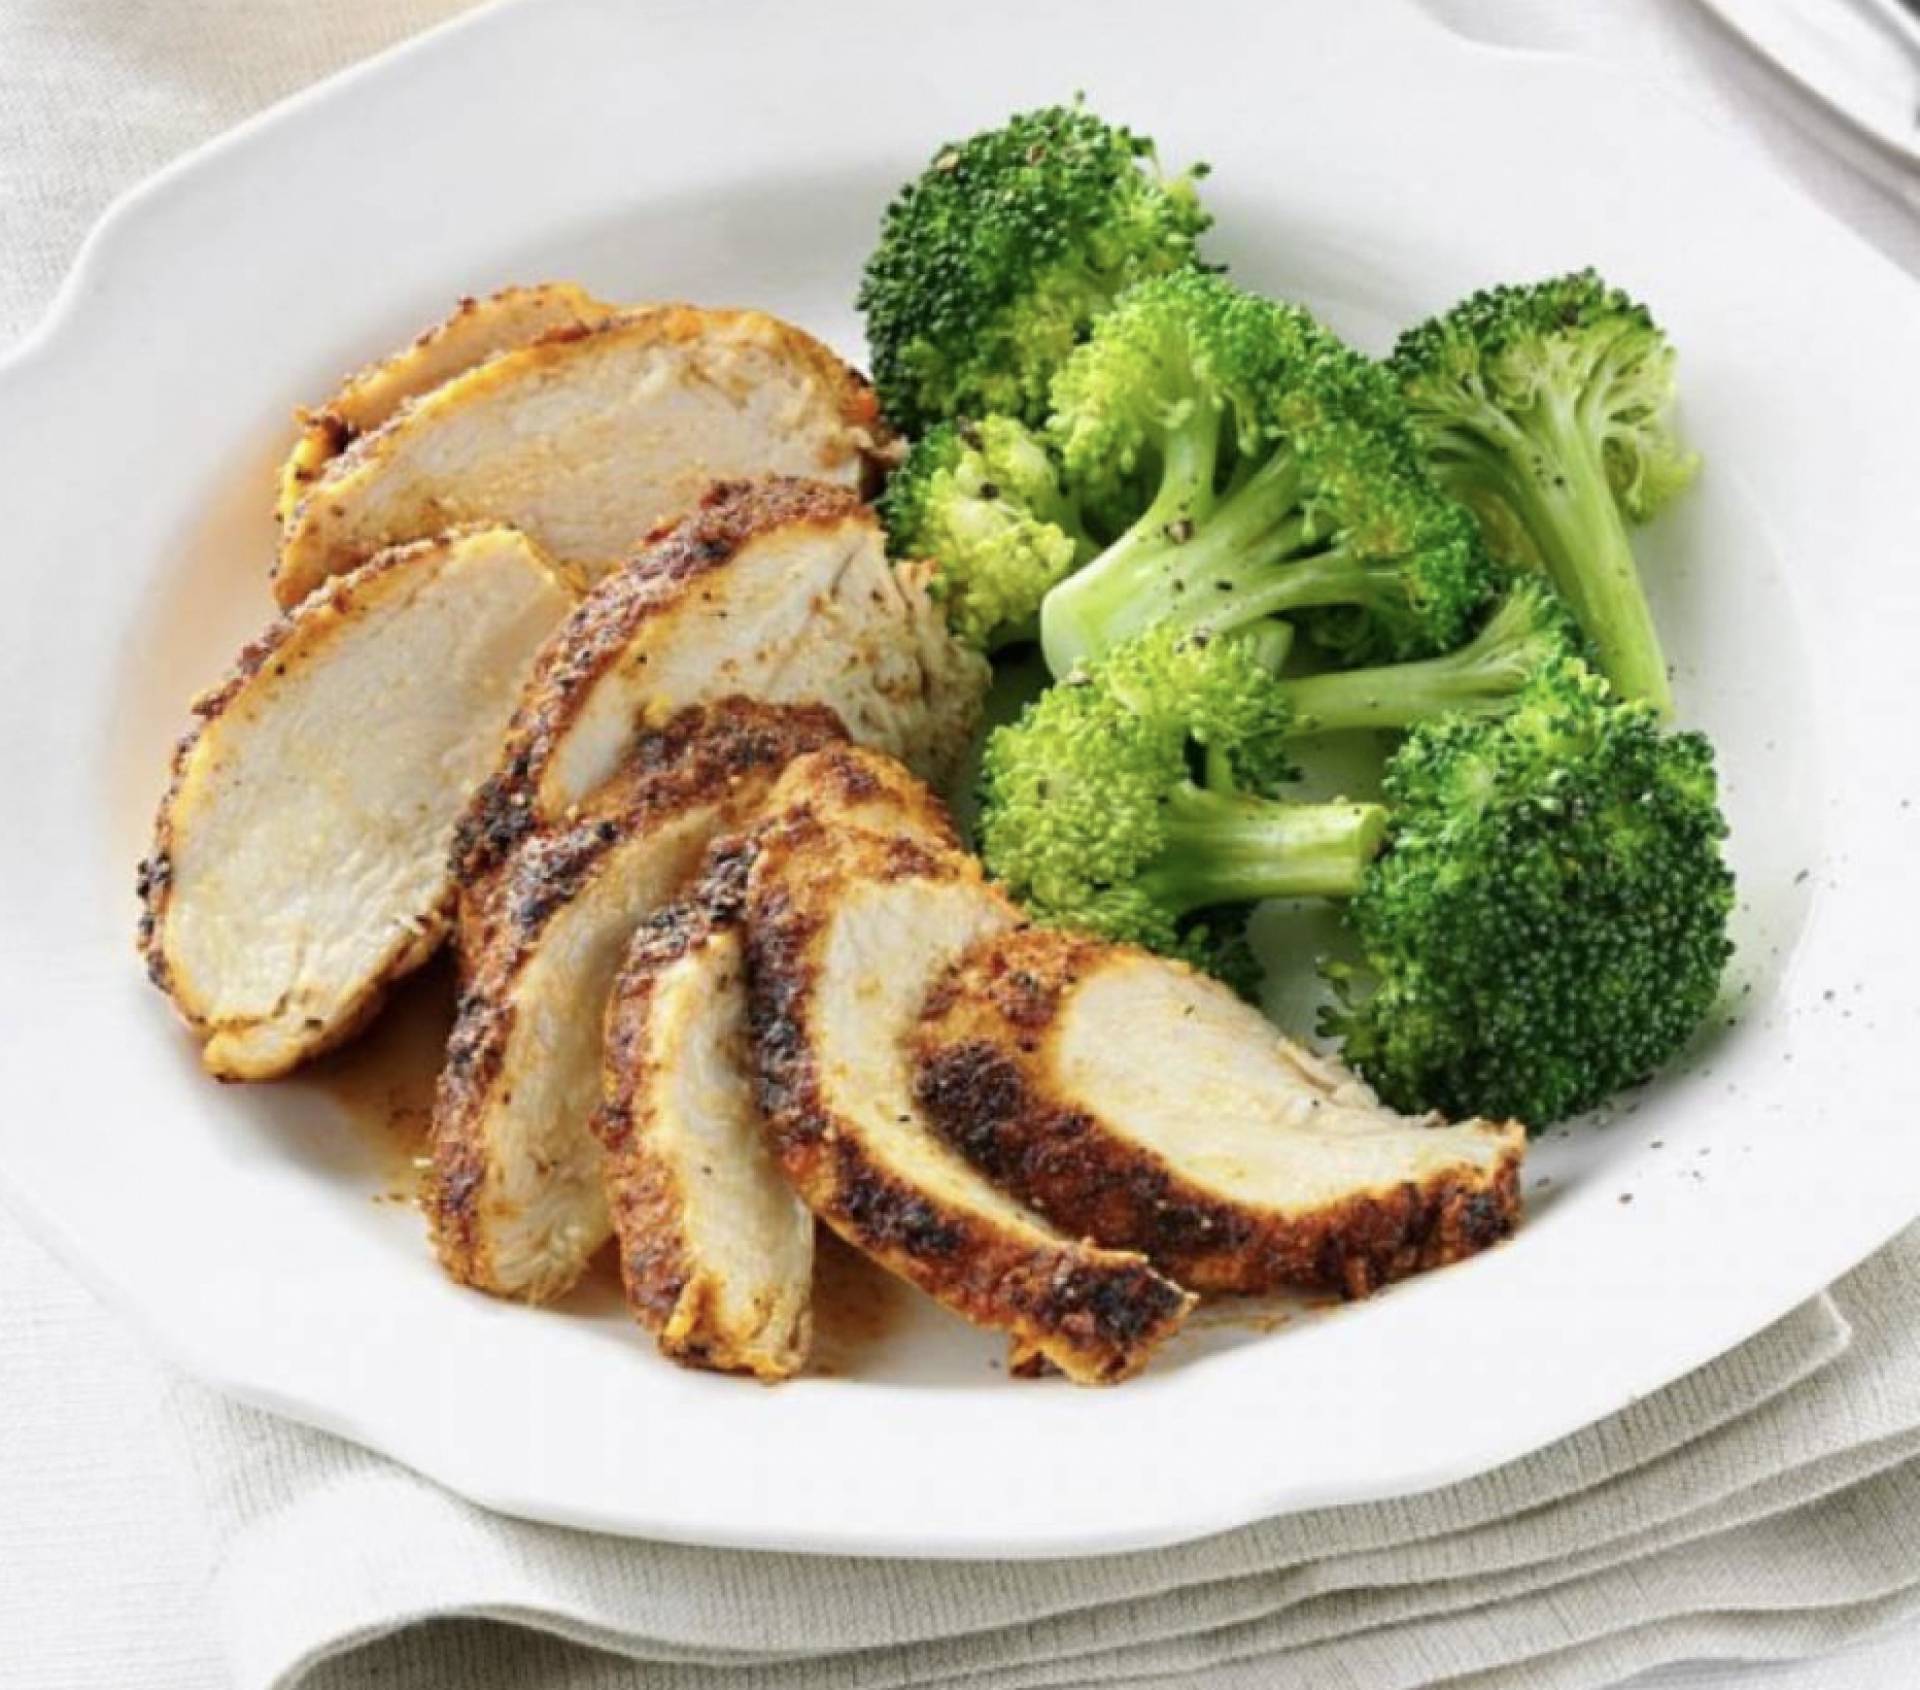 Blackened Chicken with House Broccoli and Sweet Potato (GL)